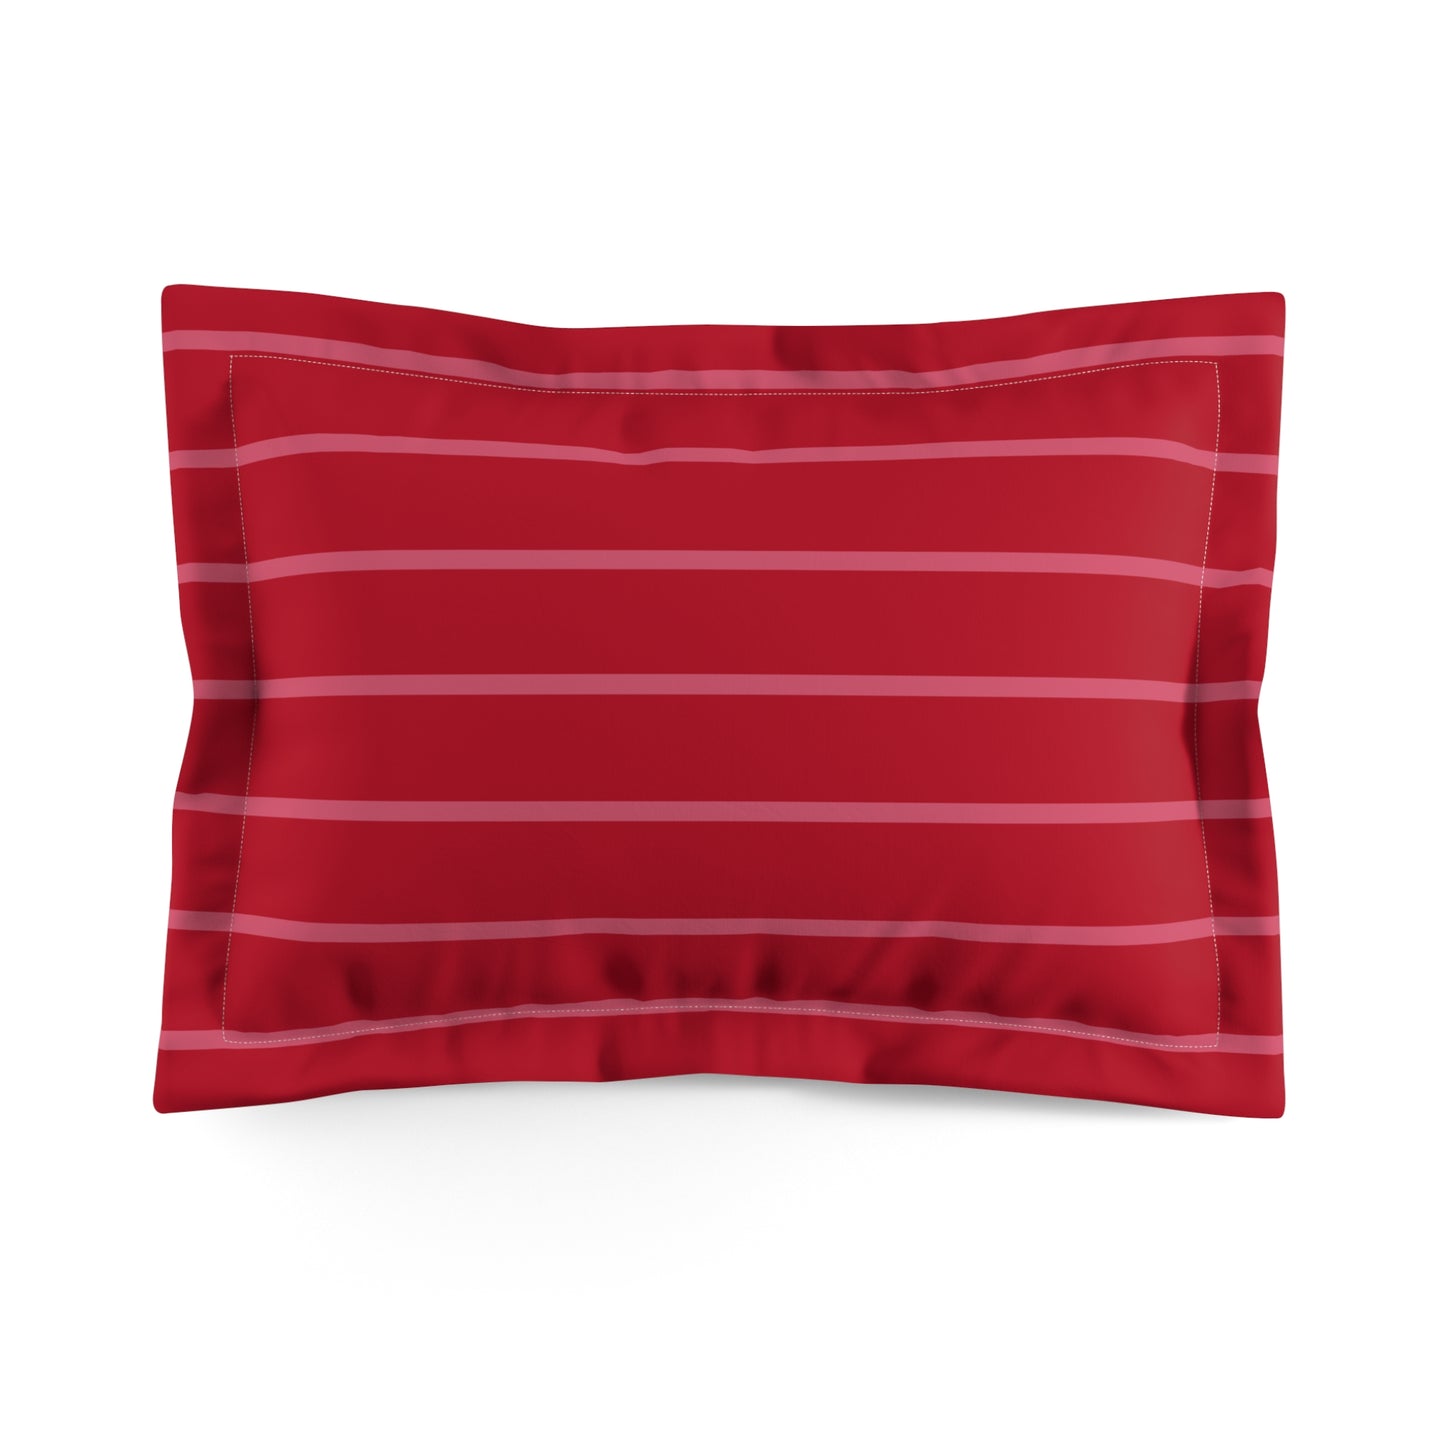 Pink Stripe In Red Pillow Sham